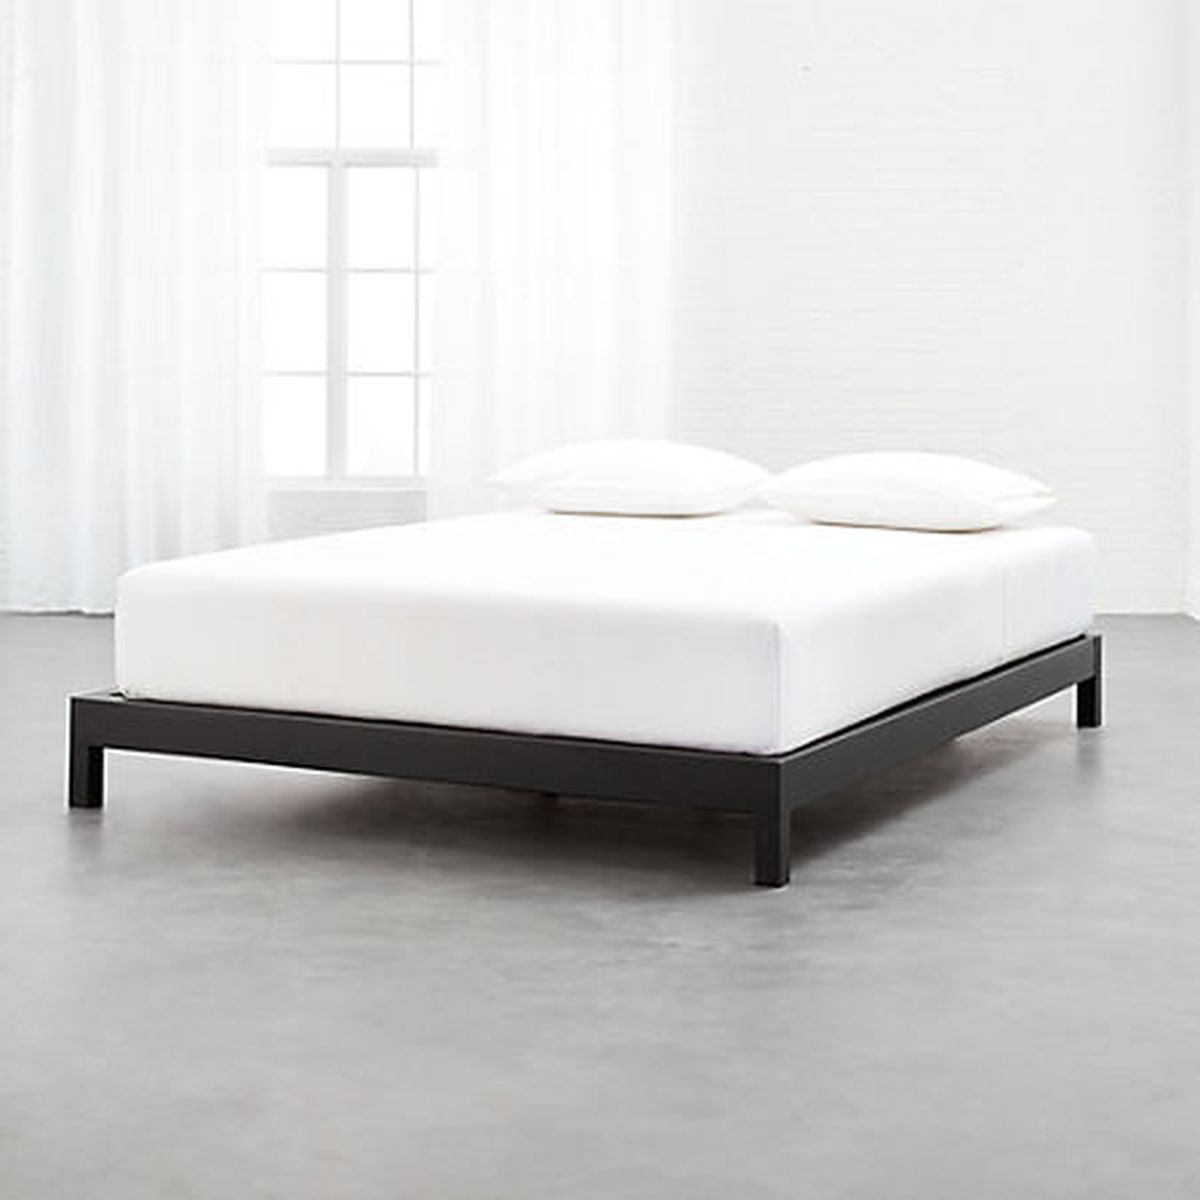 A black bed base with four legs. 